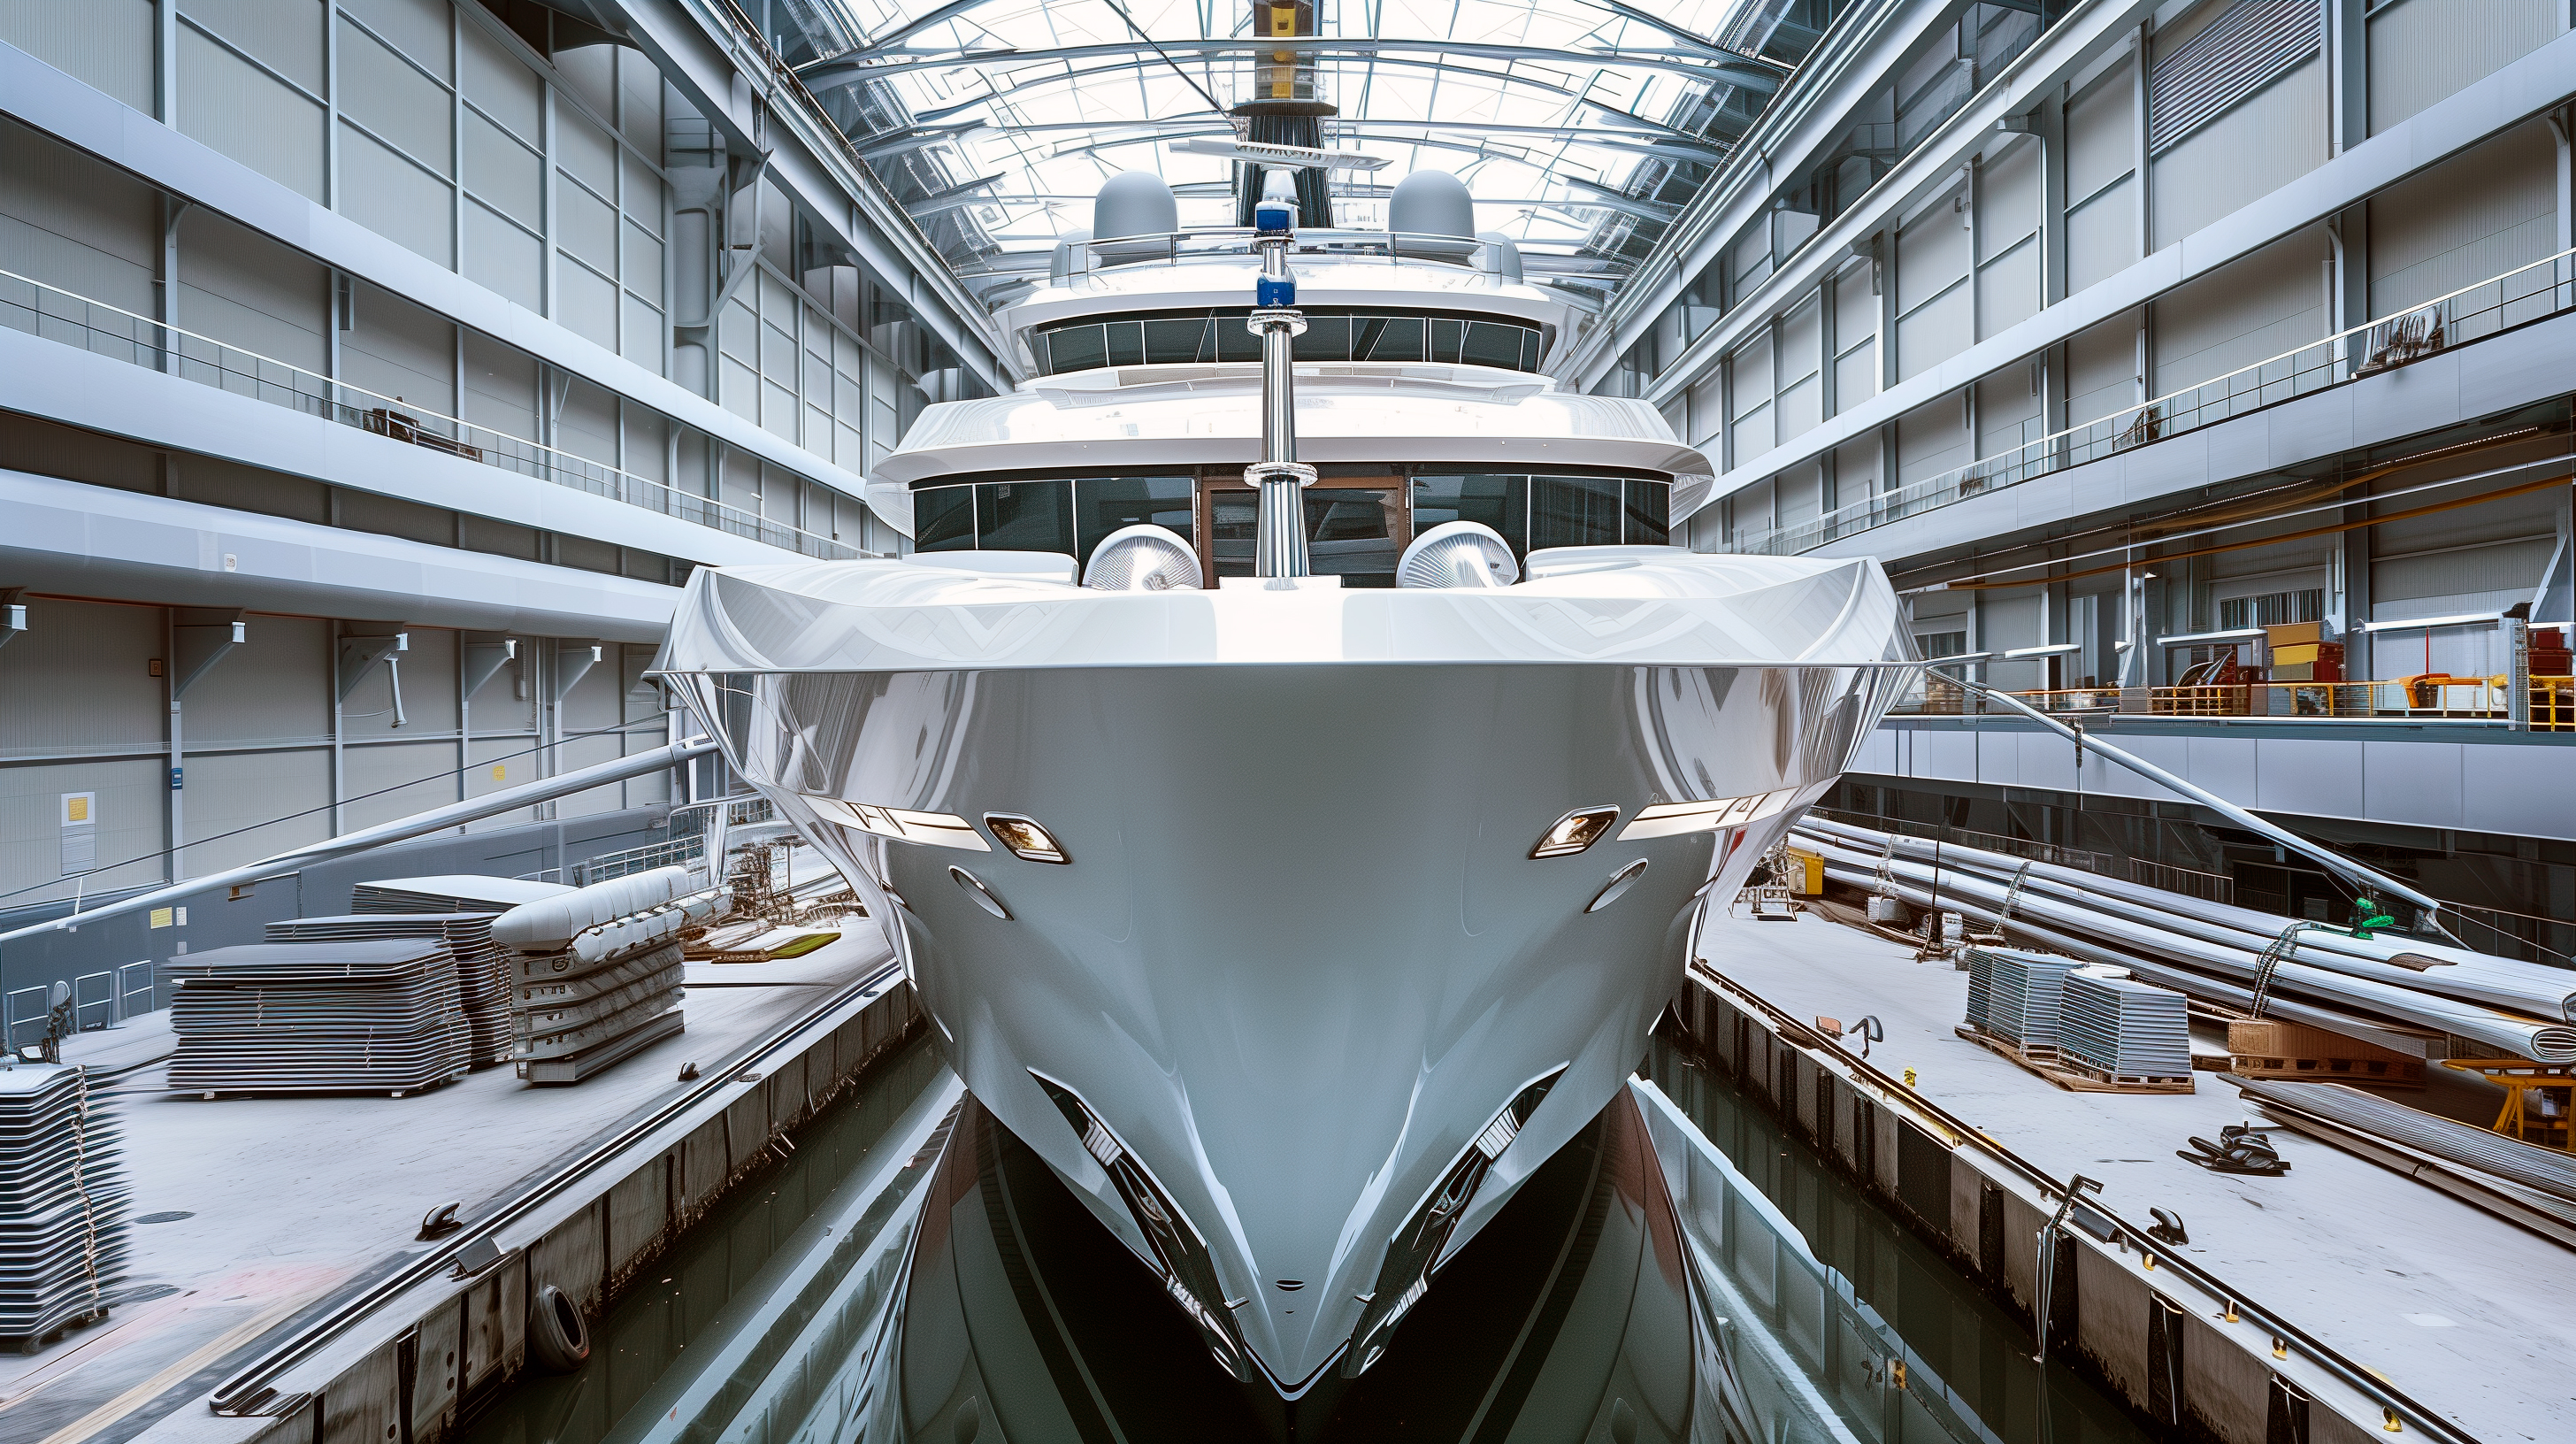 The image shows a white Megayacht in a shipyard, front view